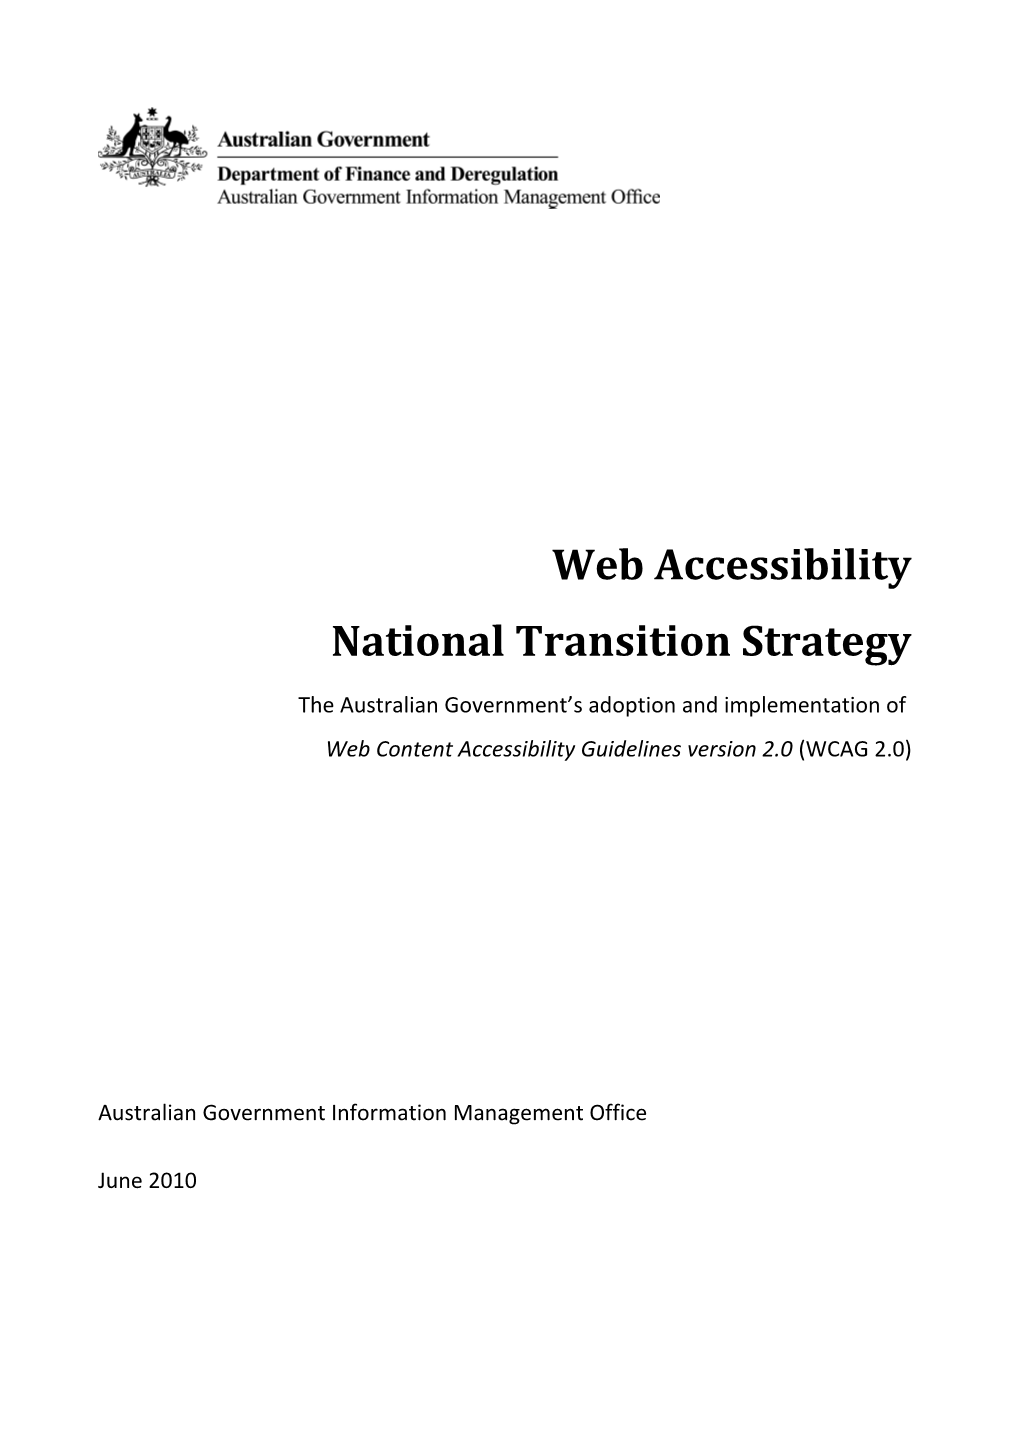 Web Accessibility National Transition Strategy